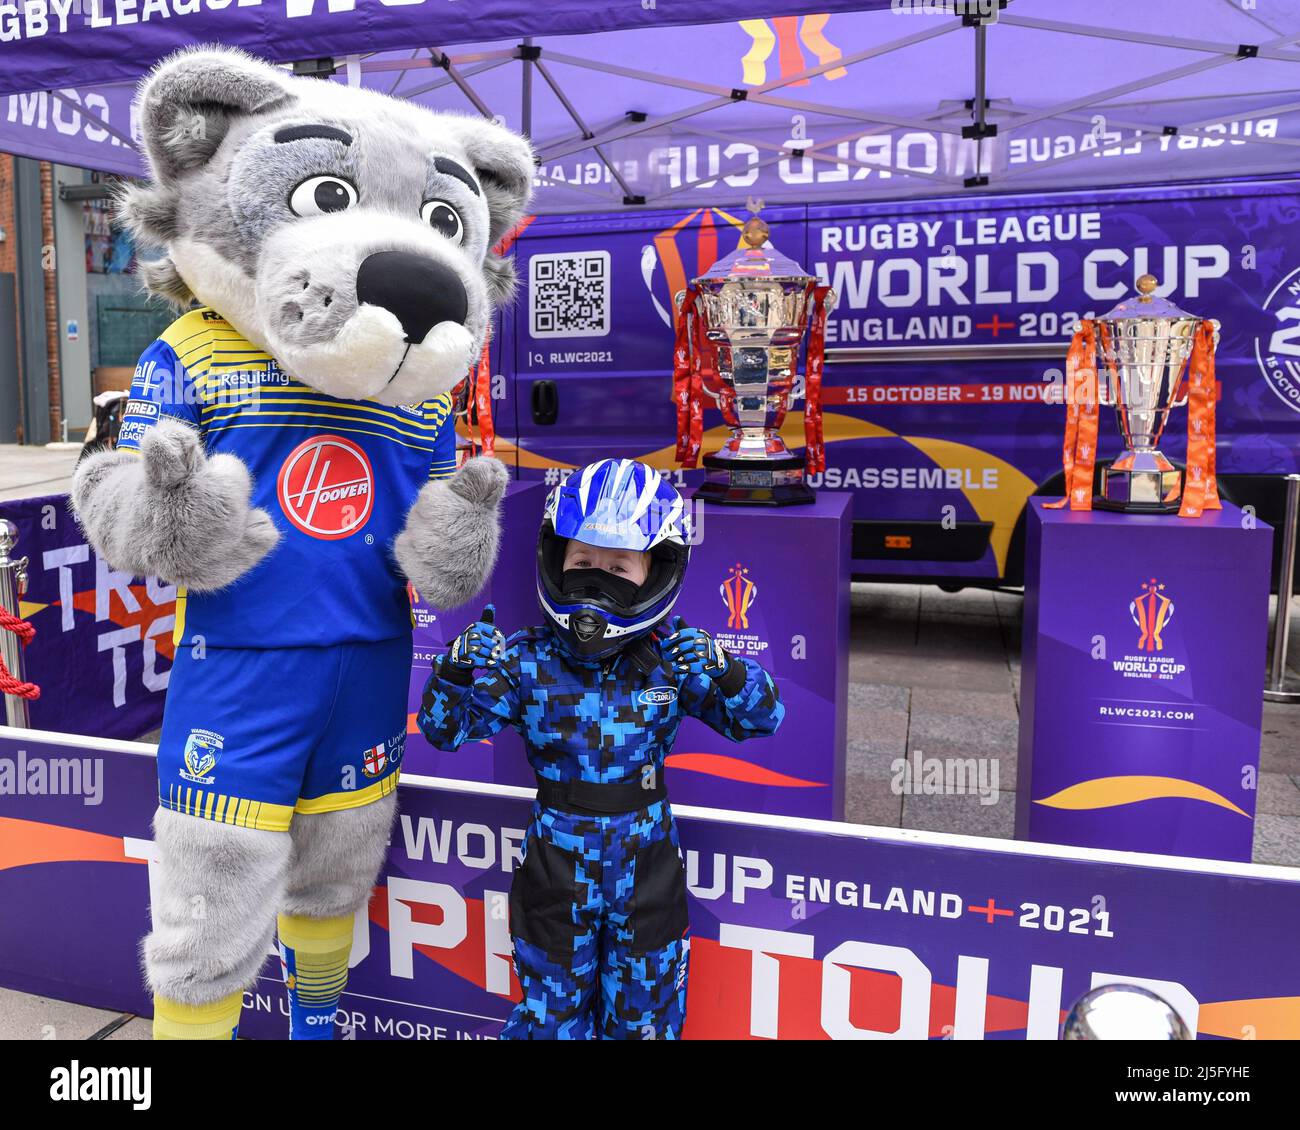 Warrington, UK. 23rd Apr, 2022. Wolfie and Whizzy Rascal attend the fan zone before the game in Warrington, United Kingdom on 4/23/2022. (Photo by Simon Whitehead/News Images/Sipa USA) Credit: Sipa USA/Alamy Live News Stock Photo